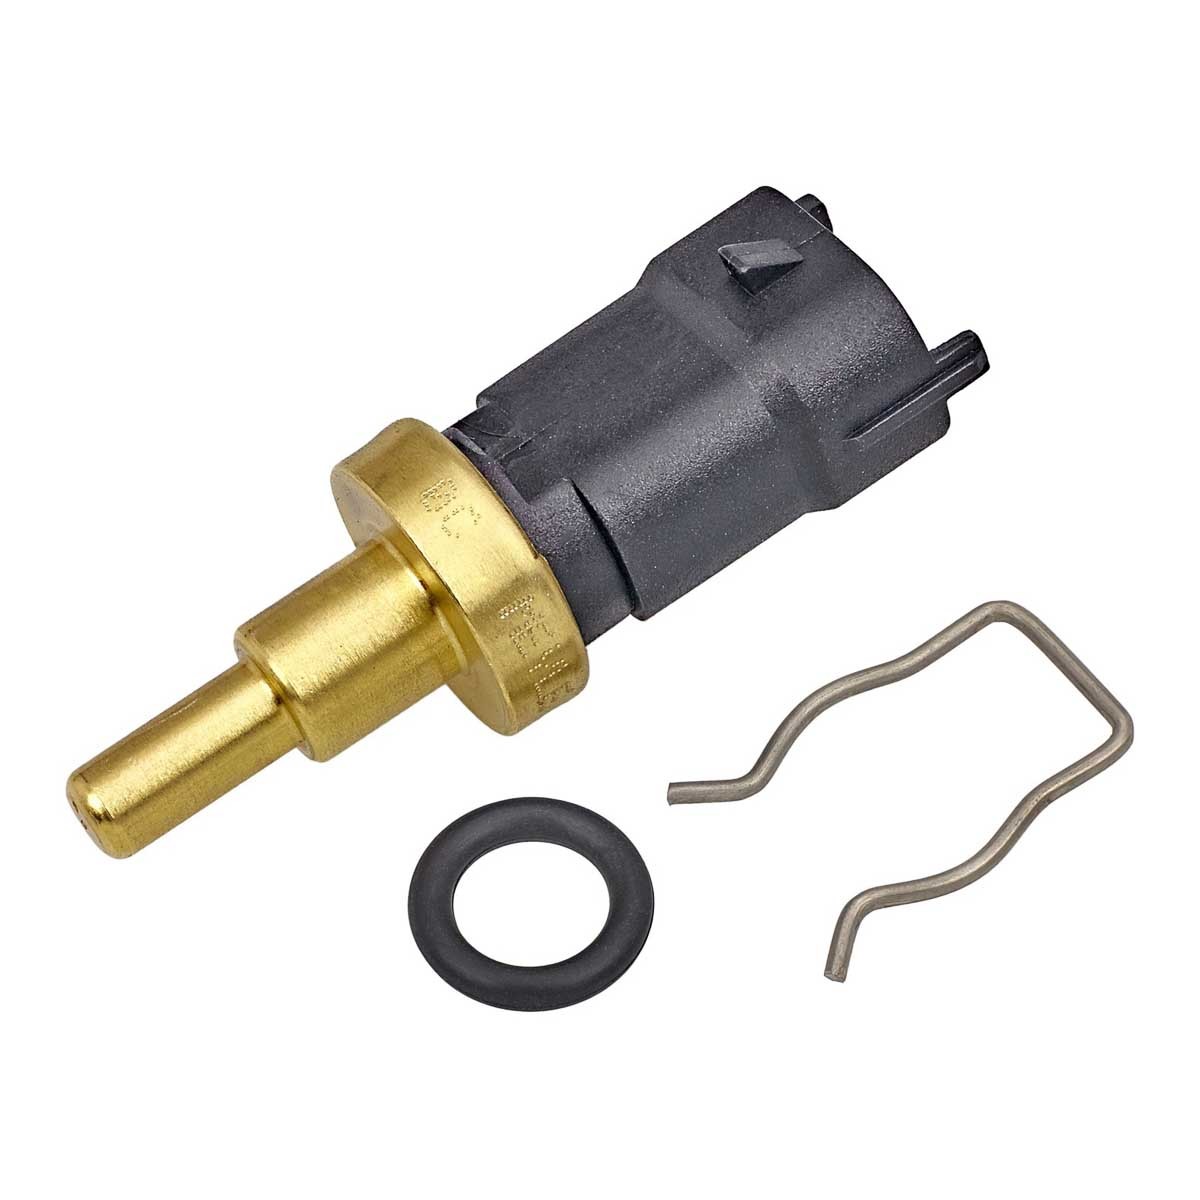 214 821 0009 MEYLE Coolant temp sensor PEUGEOT with retaining spring, with seal ring